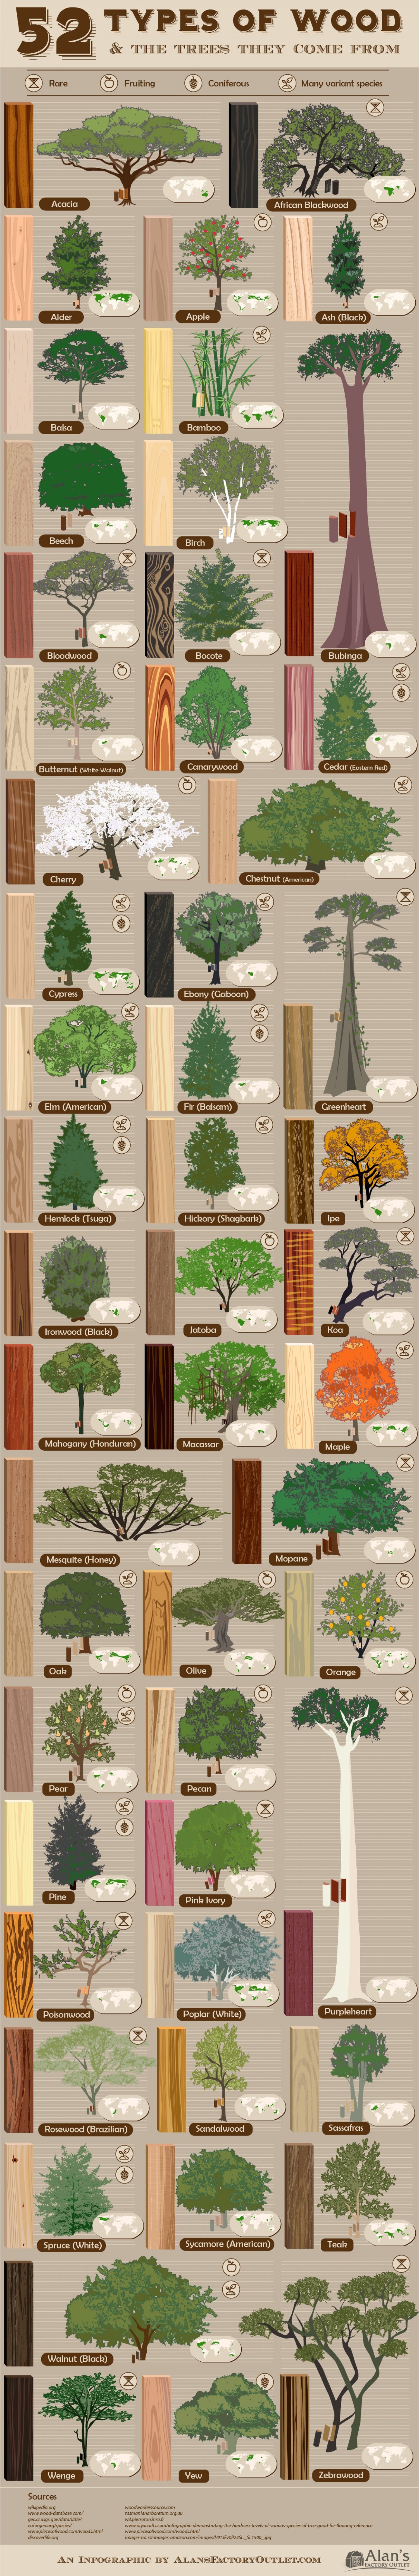 know your forest